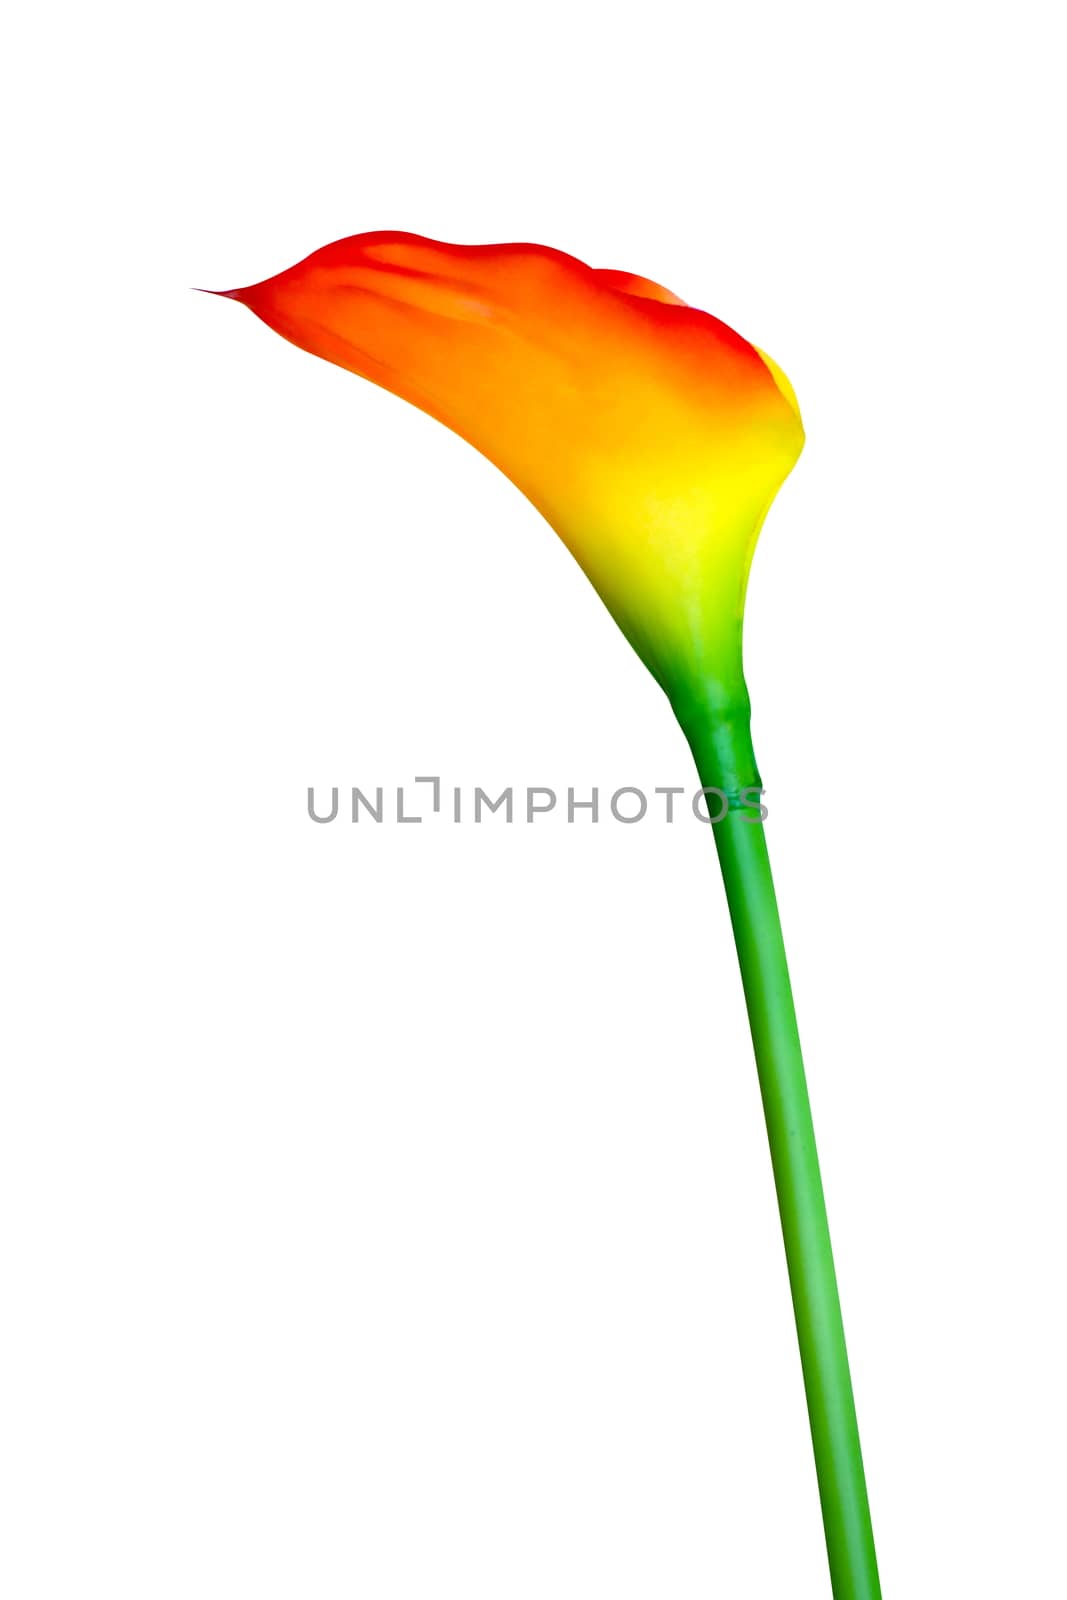 Flower Calla Lily orange red for decoration office design isolated on a white background, Floral lily blossom plant by cgdeaw